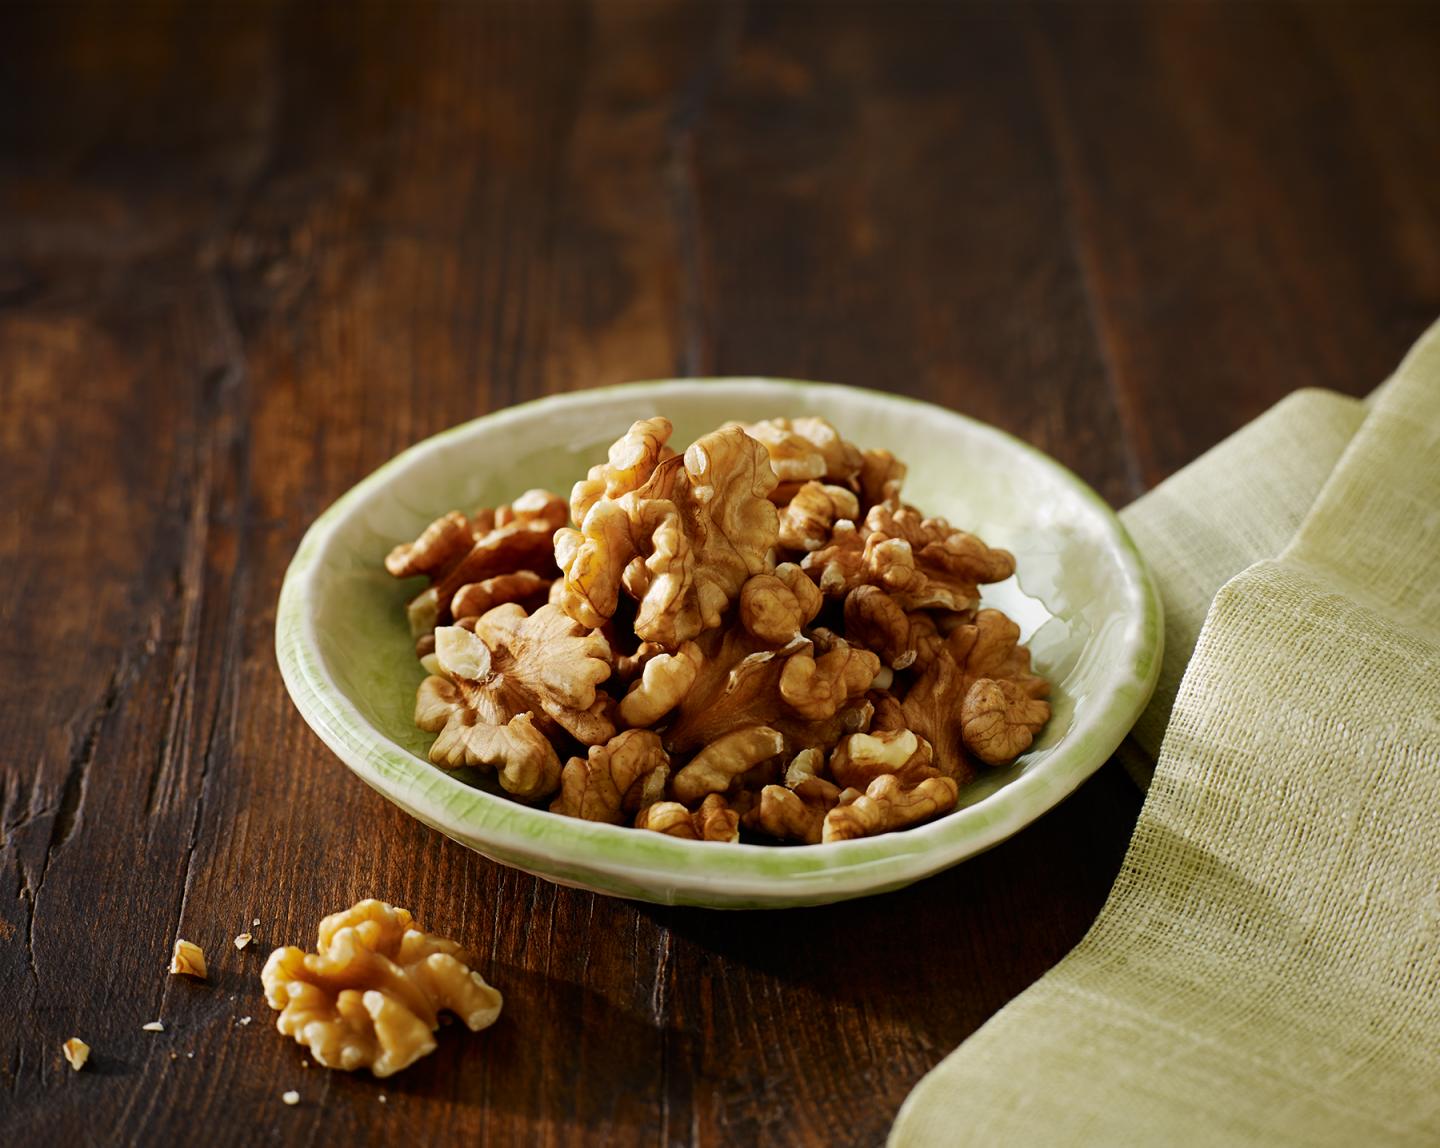 Consuming Walnuts May Help Keep the Gut Healthy, Says New Animal Research